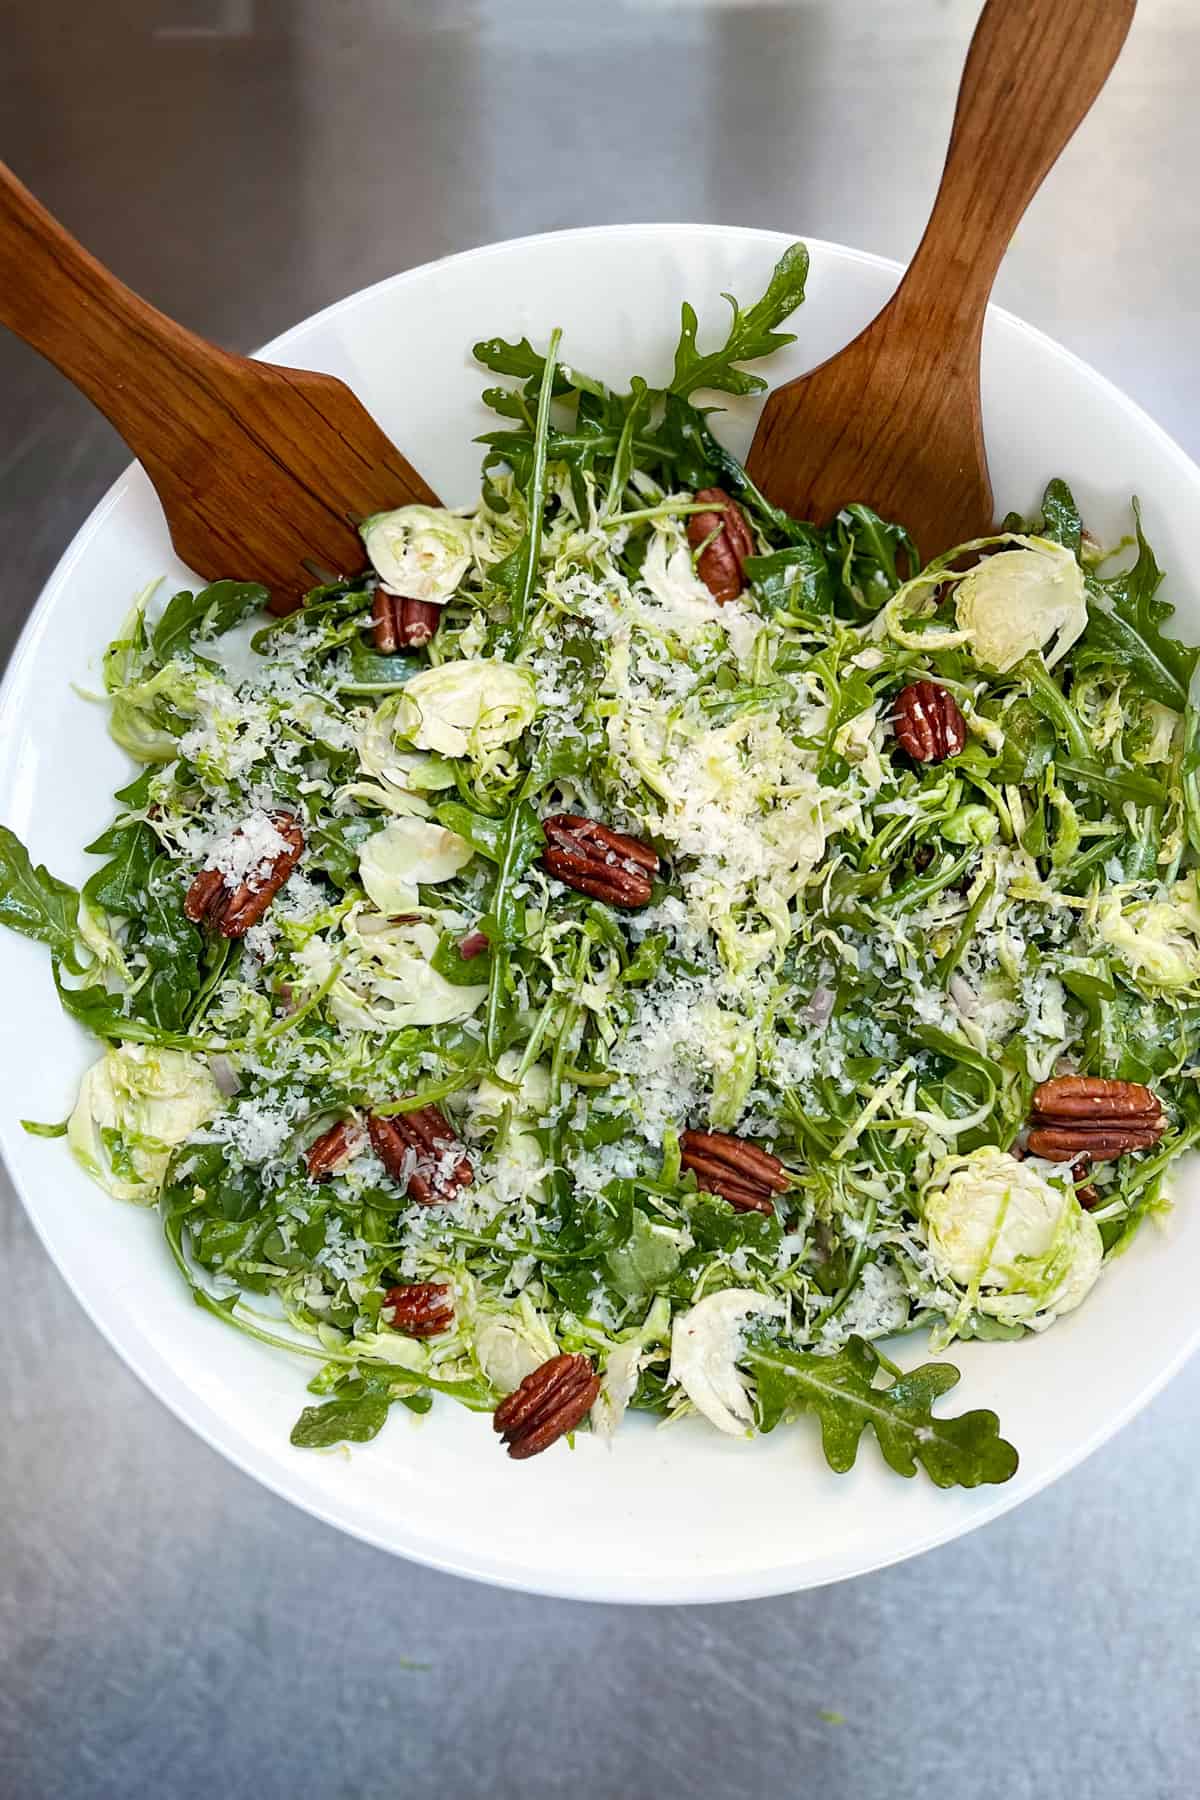 Overhead shot of a white bowl filled with shredded Brussels sprout and arugula salad with toasted pecans and grated parmesan cheese, two brown wooden salad forks stuck into the salad